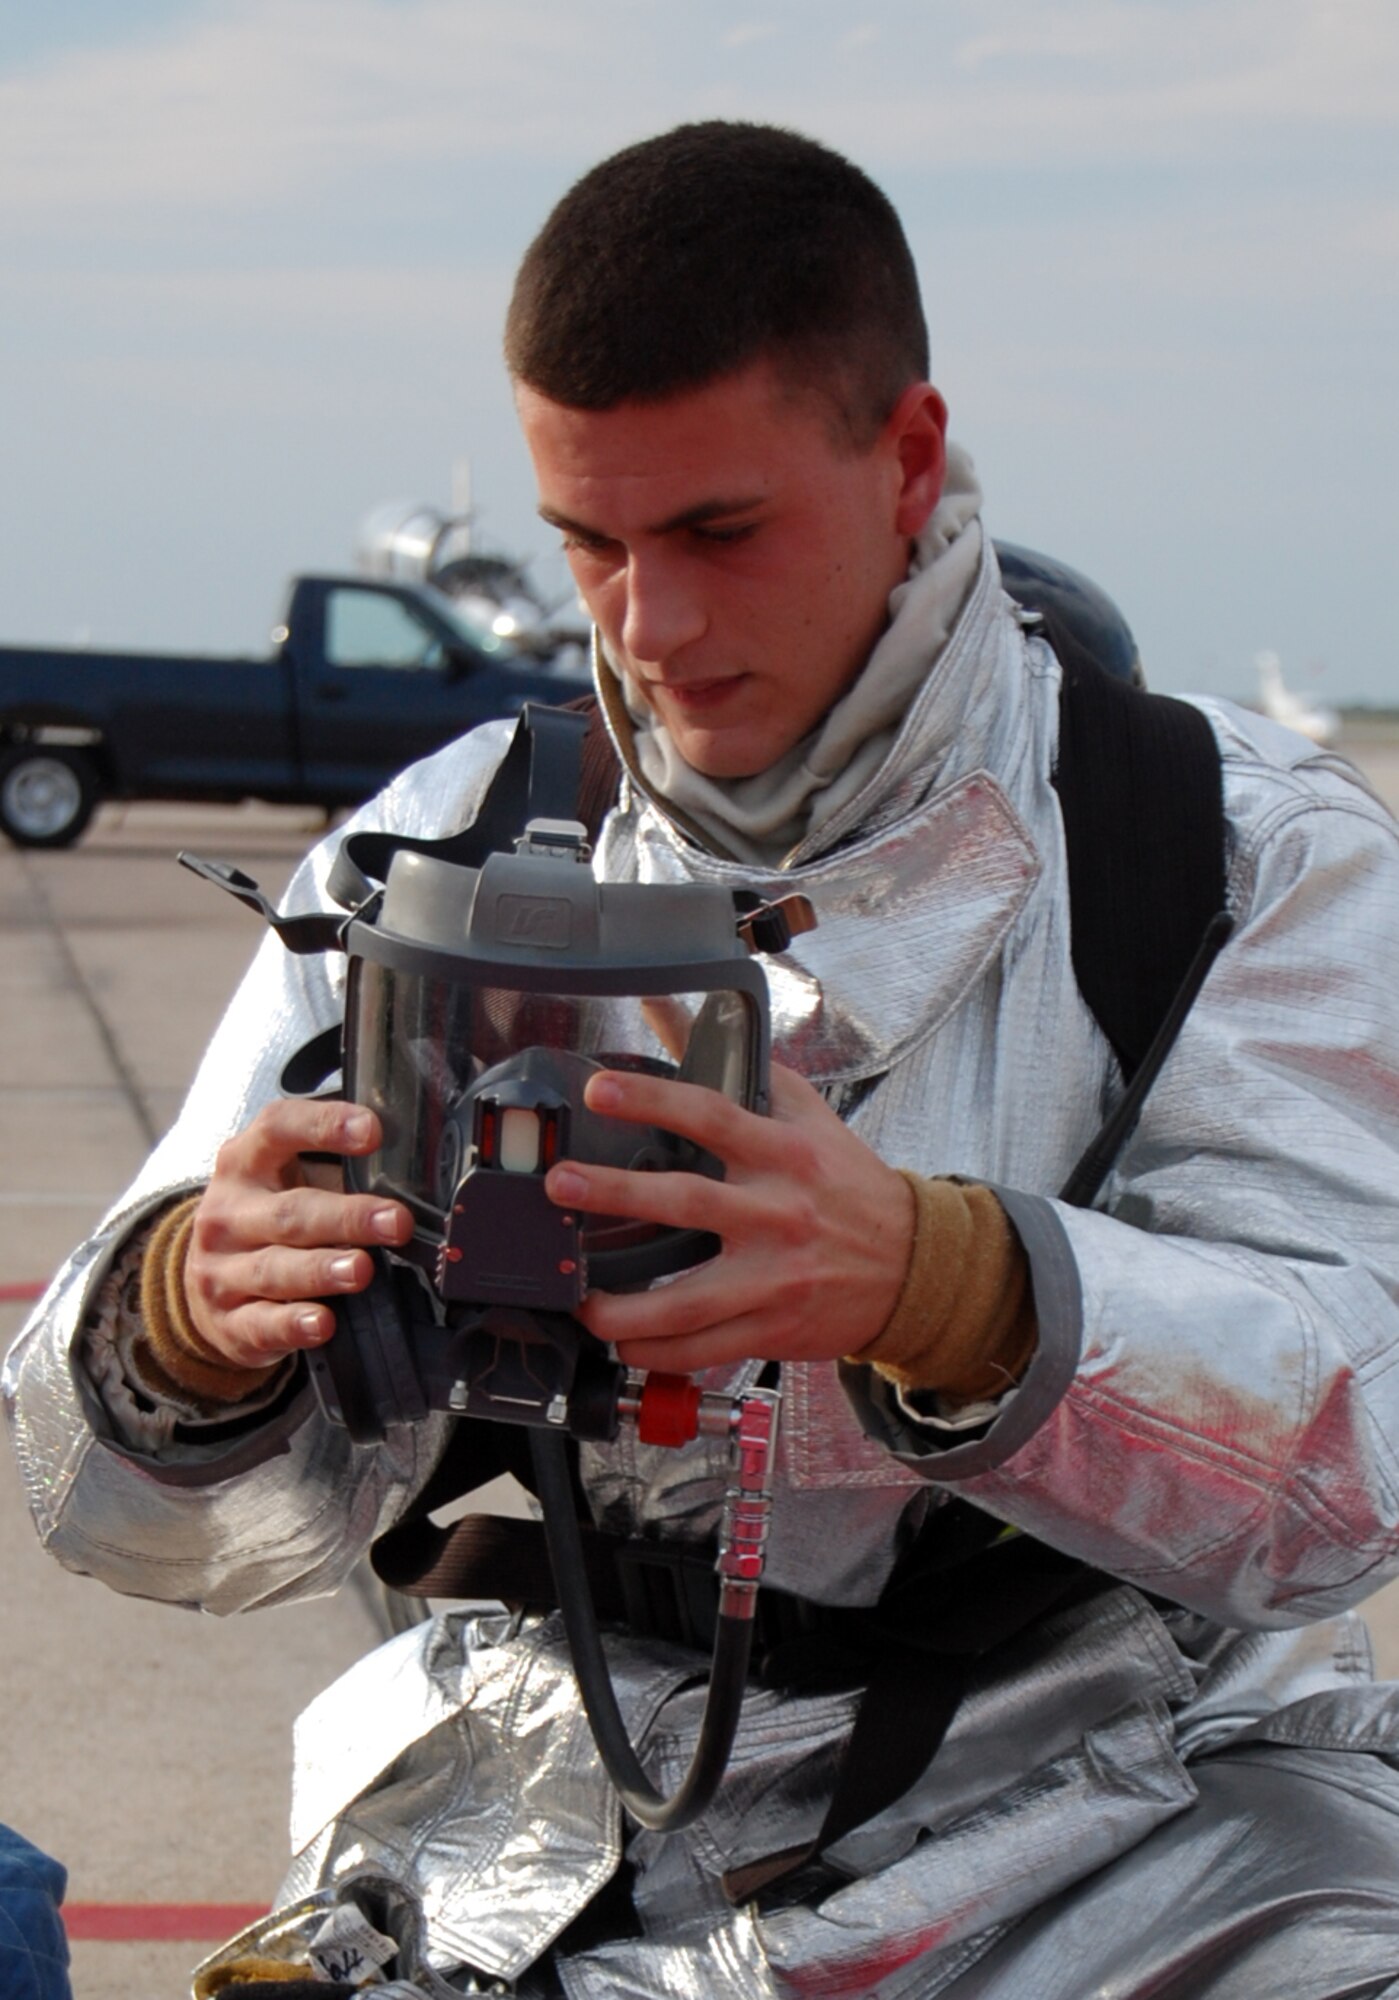 LAUGHLIN AIR FORCE BASE, Texas – Airman Matthew Hall, a firefighter from the 47th Installation Support Squadron, removes his gear after fighting a simulated aircraft fire during an exercise on the flight line here Sept. 24.  (U.S. Air Force photo by Staff Sgt Austin M. May)